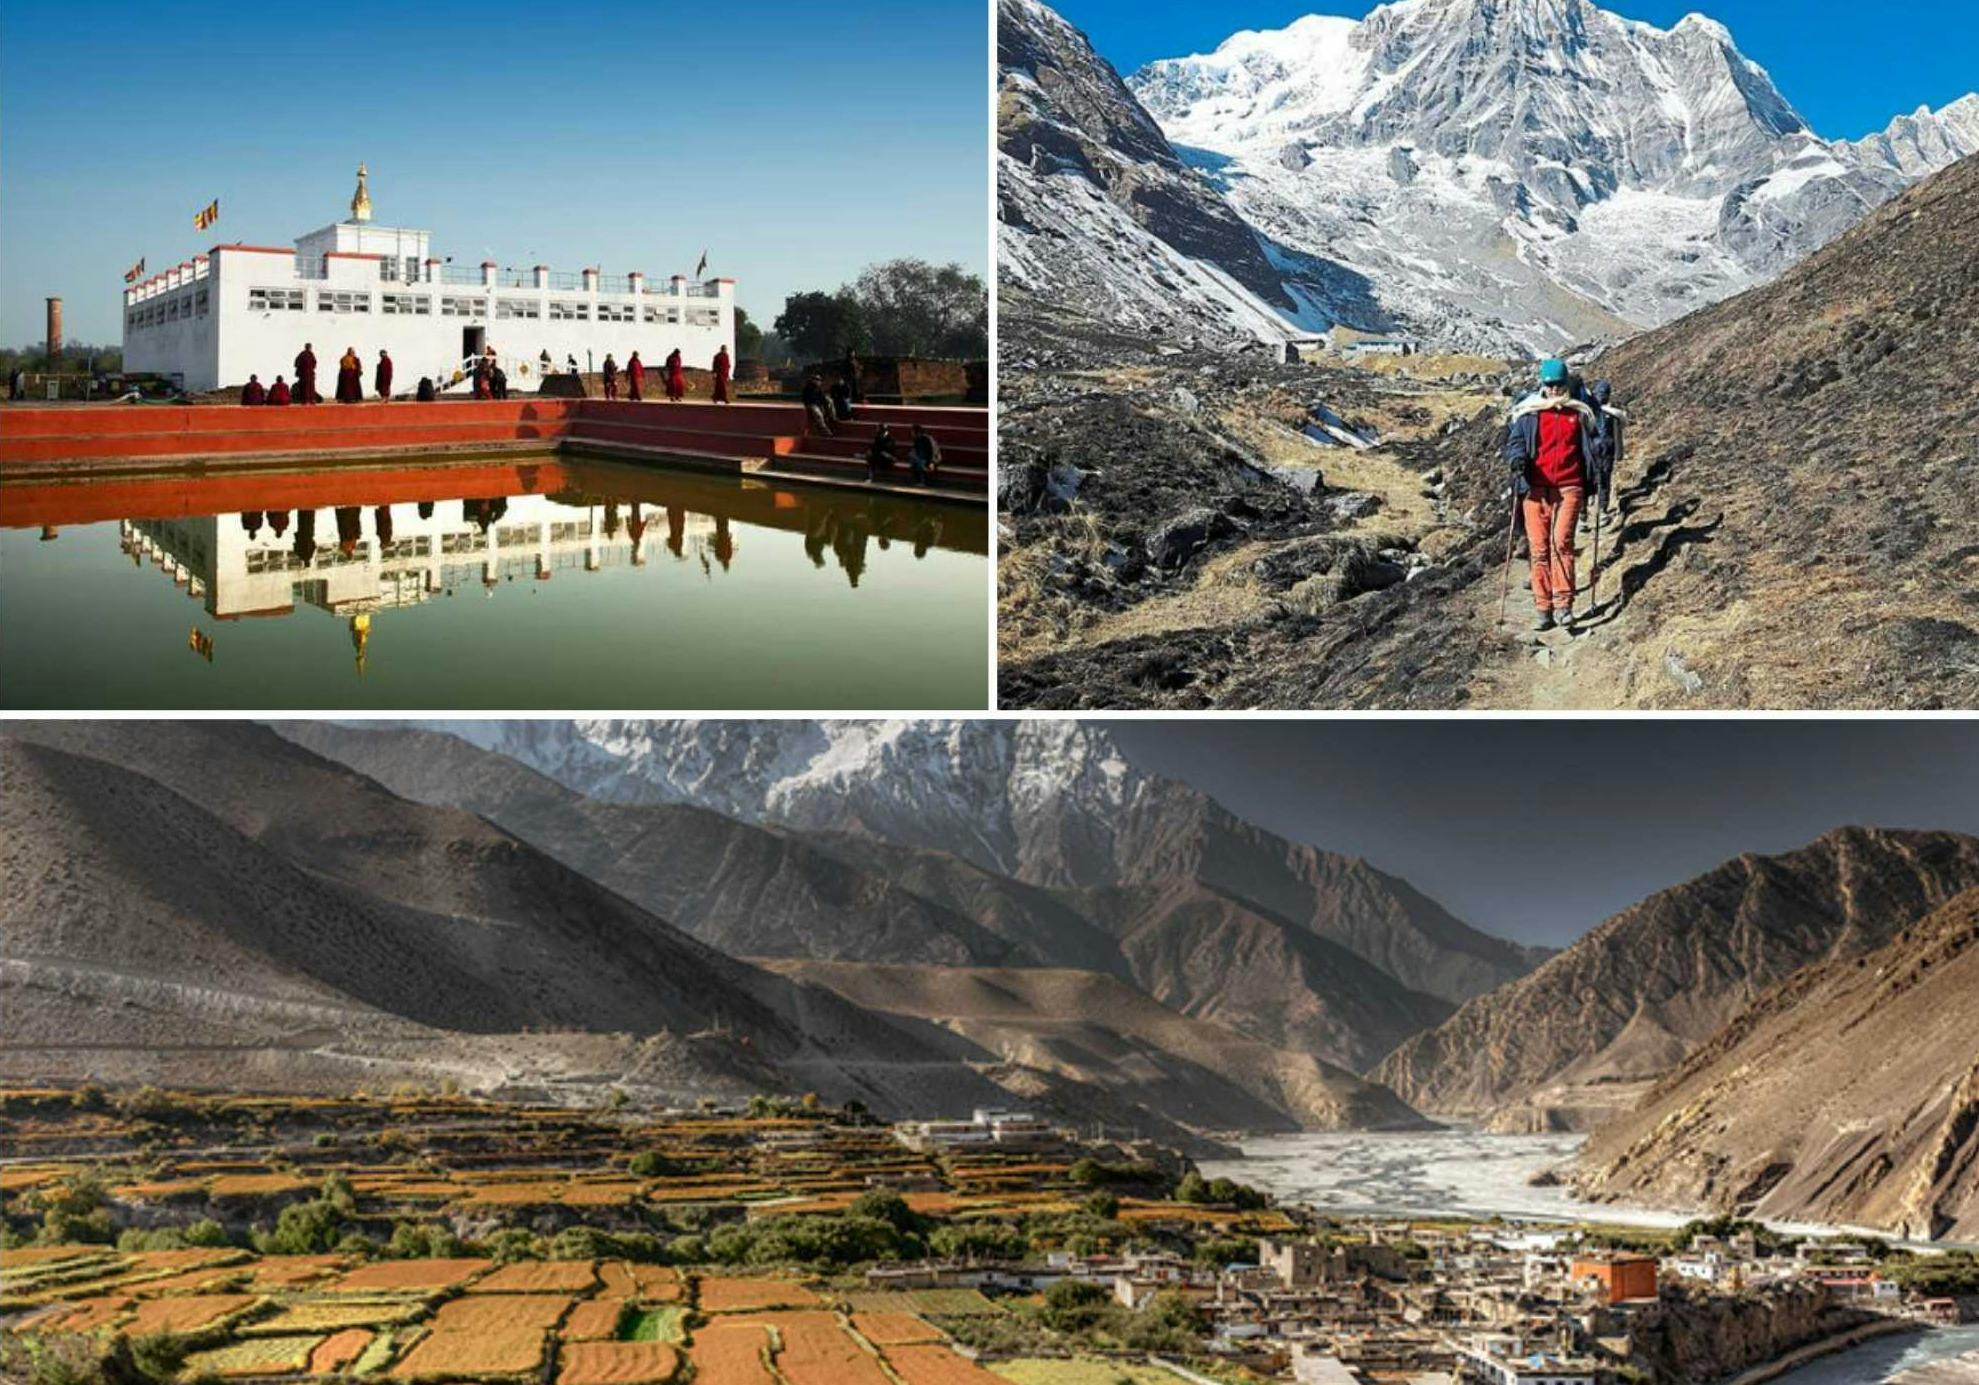 10 Most Amazing Facts About Nepal That Everyone Should Know